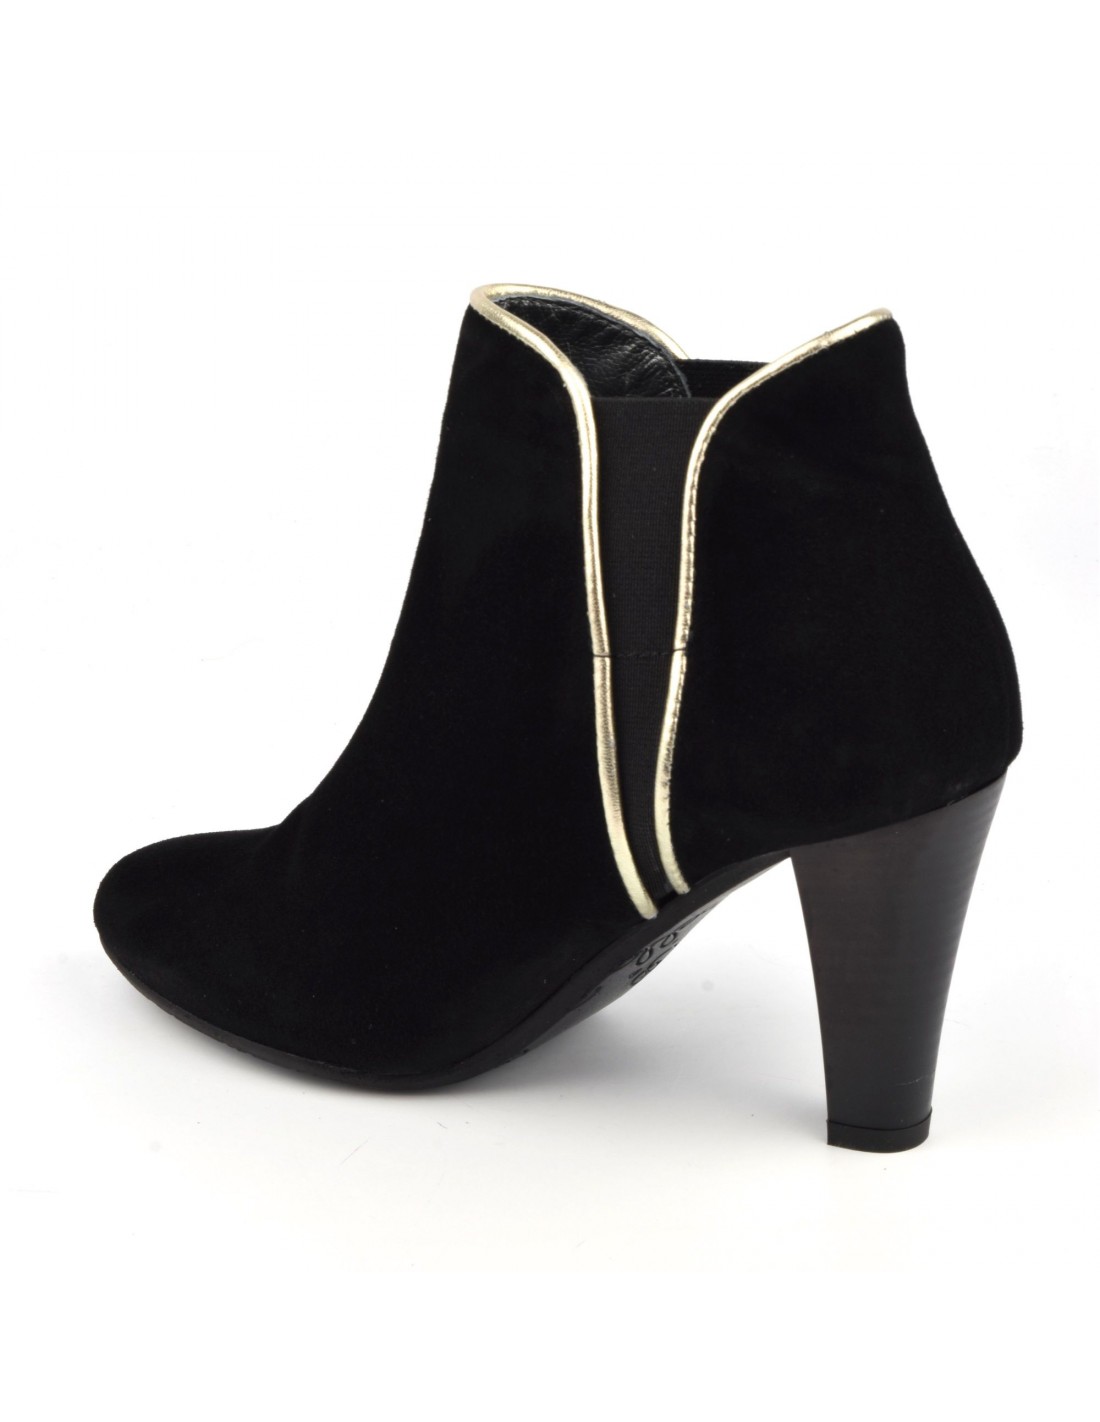 Ankle boots with elastic threading, nubuck leather, black, Vallas, Bella B